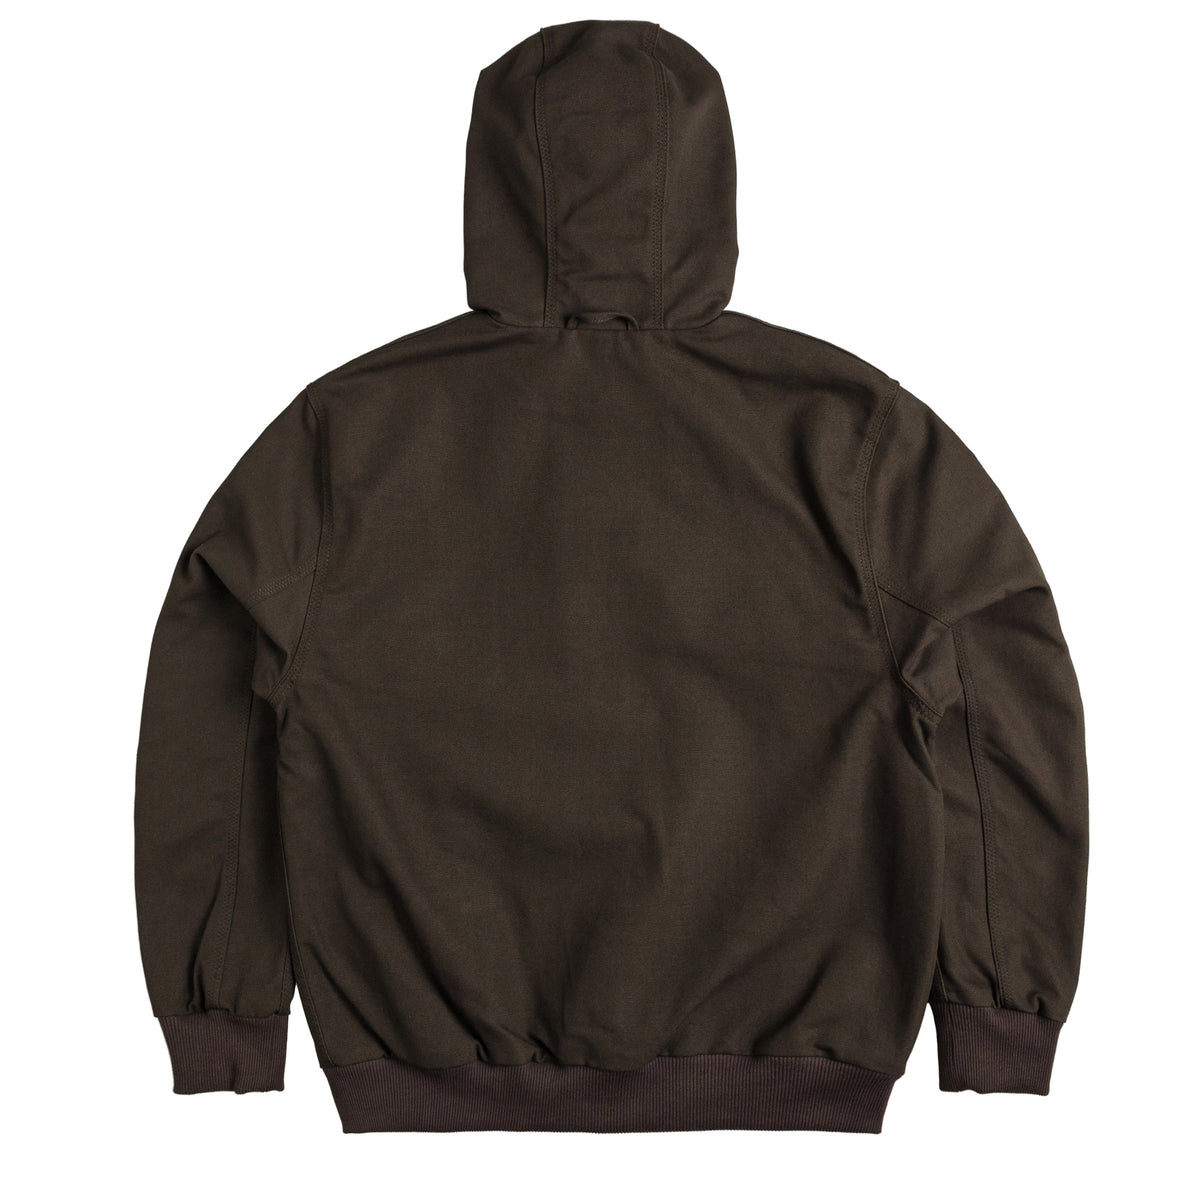 Carhartt WIP Active Jacket - Tobacco (Rigid) – Route One